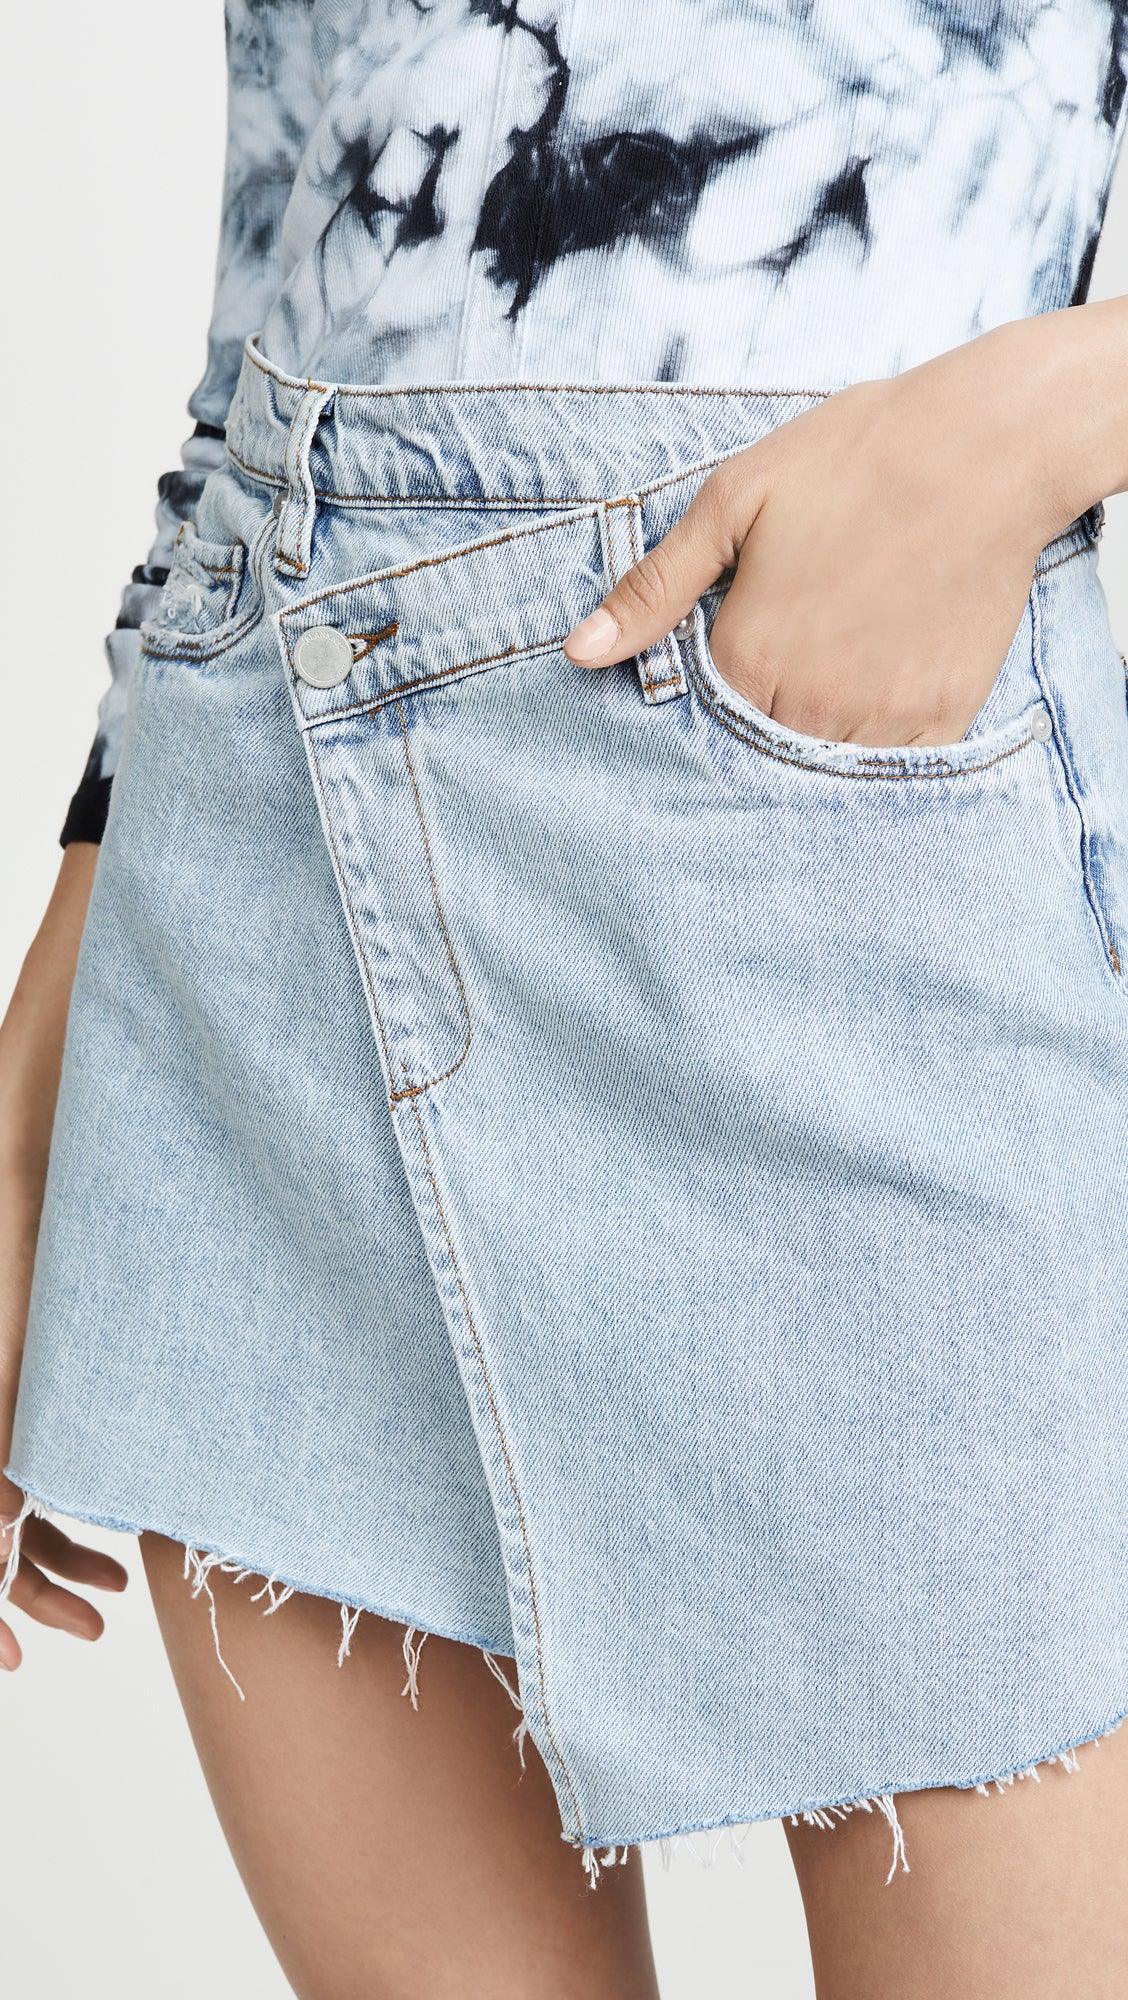 Take Your Summer Denim Up a Notch With These Key Pieces | Essence